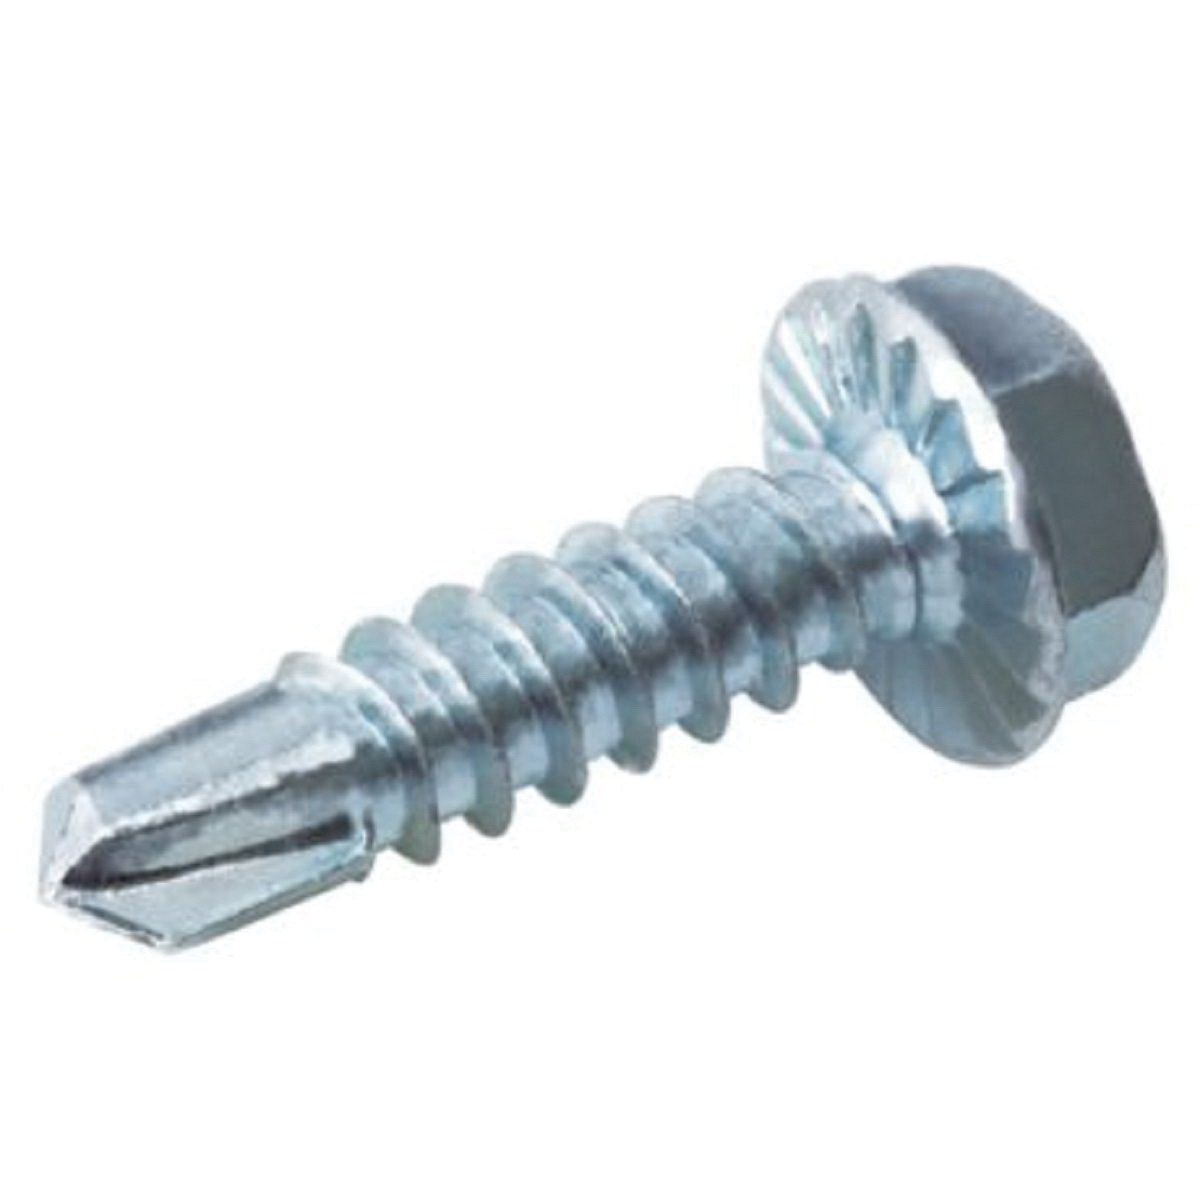 Duro Dyne® Pro Point 14180 Self Piercing Screw, #10 Thread, 1/2 in OAL, Hexagonal Head, 5/16 in Drive, Unslotted Drive